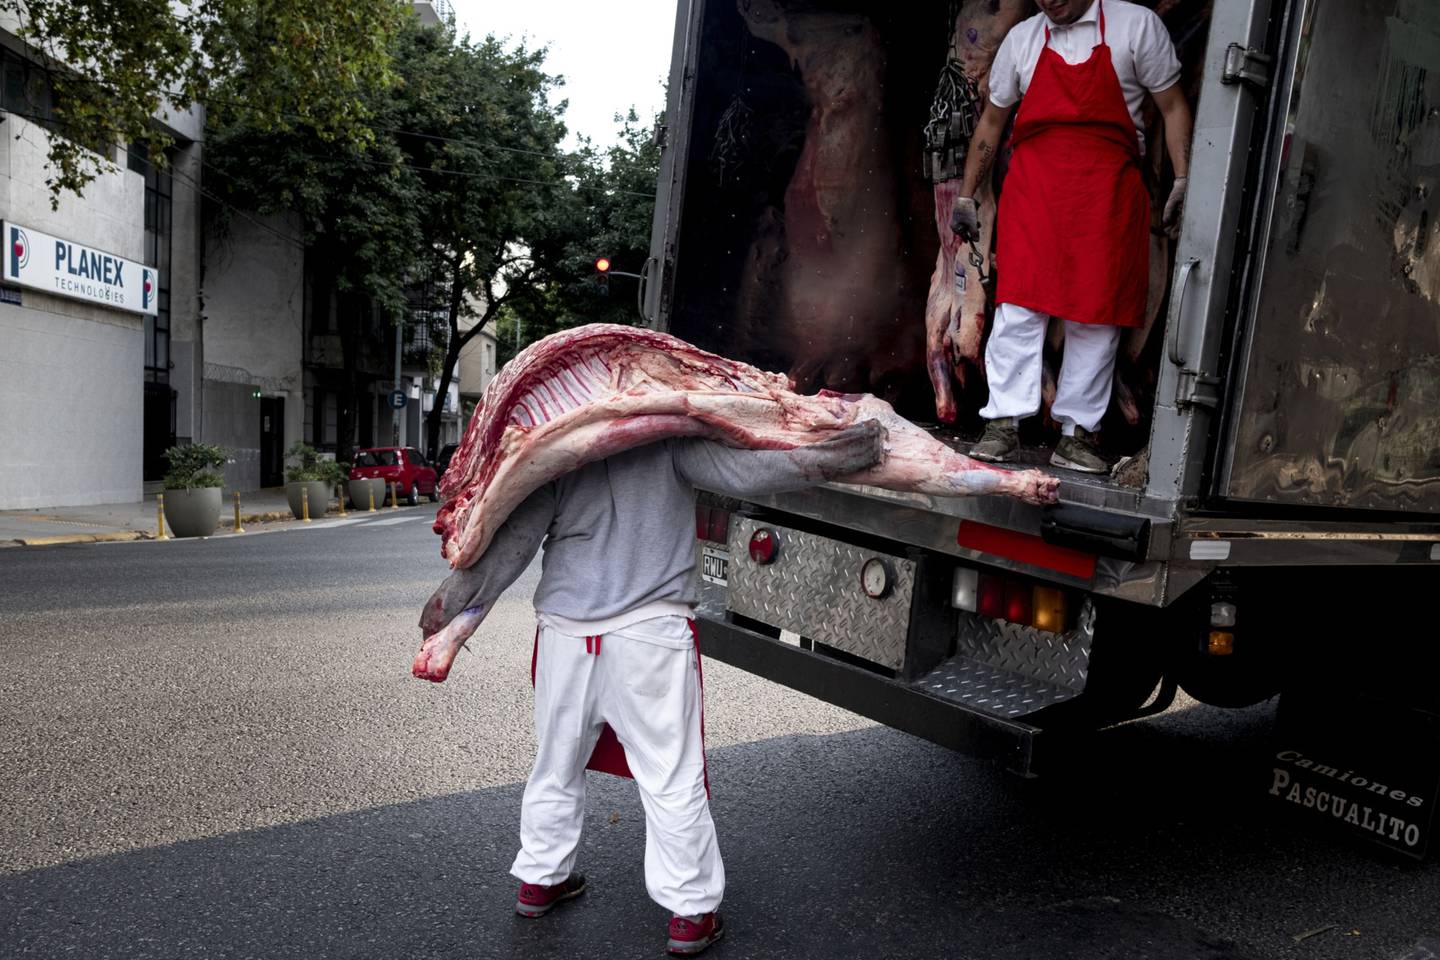 A worker carries a side of beef out of a refrigerated truck to a butcher's shop in Buenos Aires, Argentina.